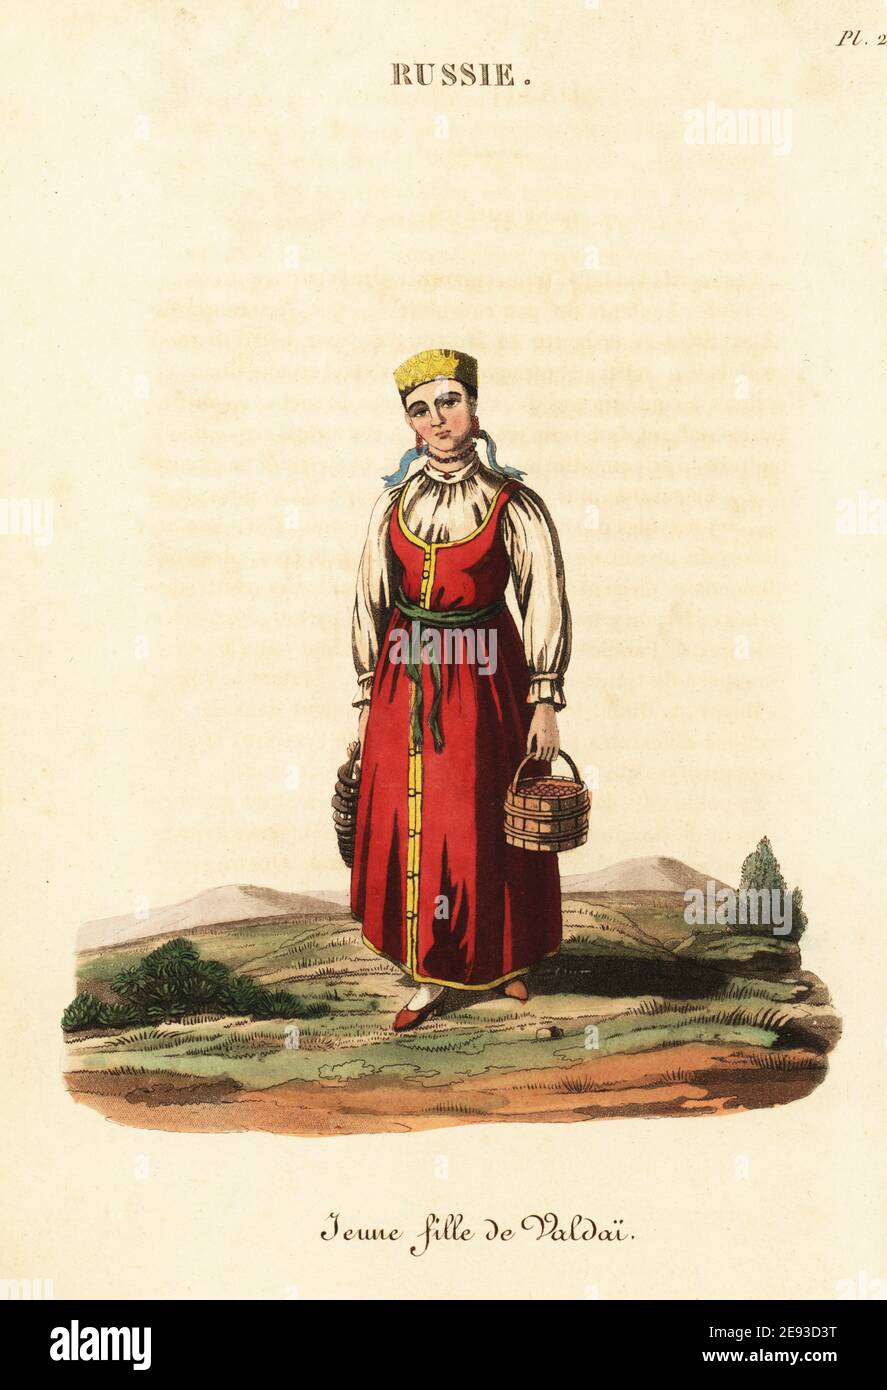 Young girl of Valday town, 18th century. Peopled by Poles taken prisoner  during the reign of Tsar Alexei Michaelovich. (Novgorod Oblast), Russia  Unmarried woman of Waldai, Jeune fille de Valdai. Handcoloured copperplate